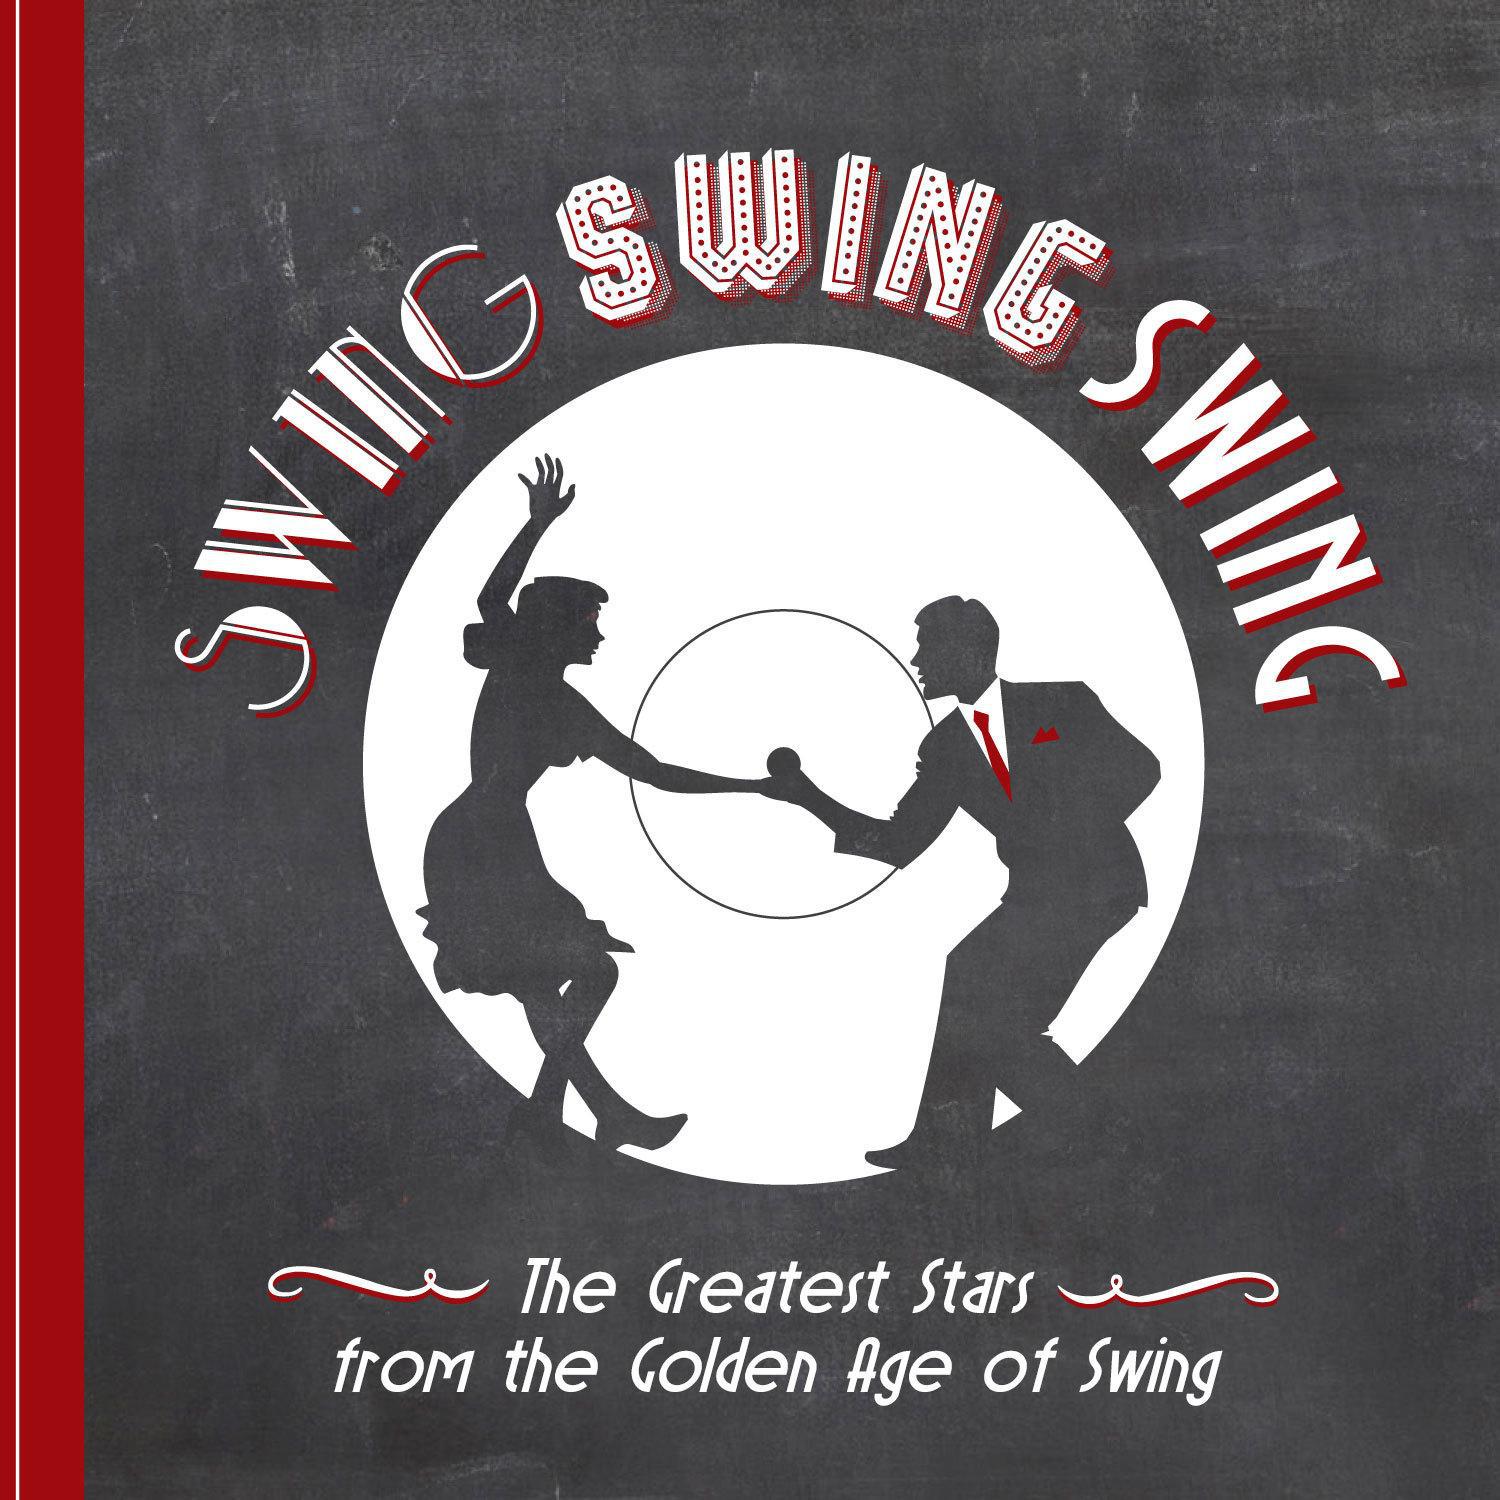 Swing! Swing! Swing! - The Great Stars from the Golden Age of Swing and More